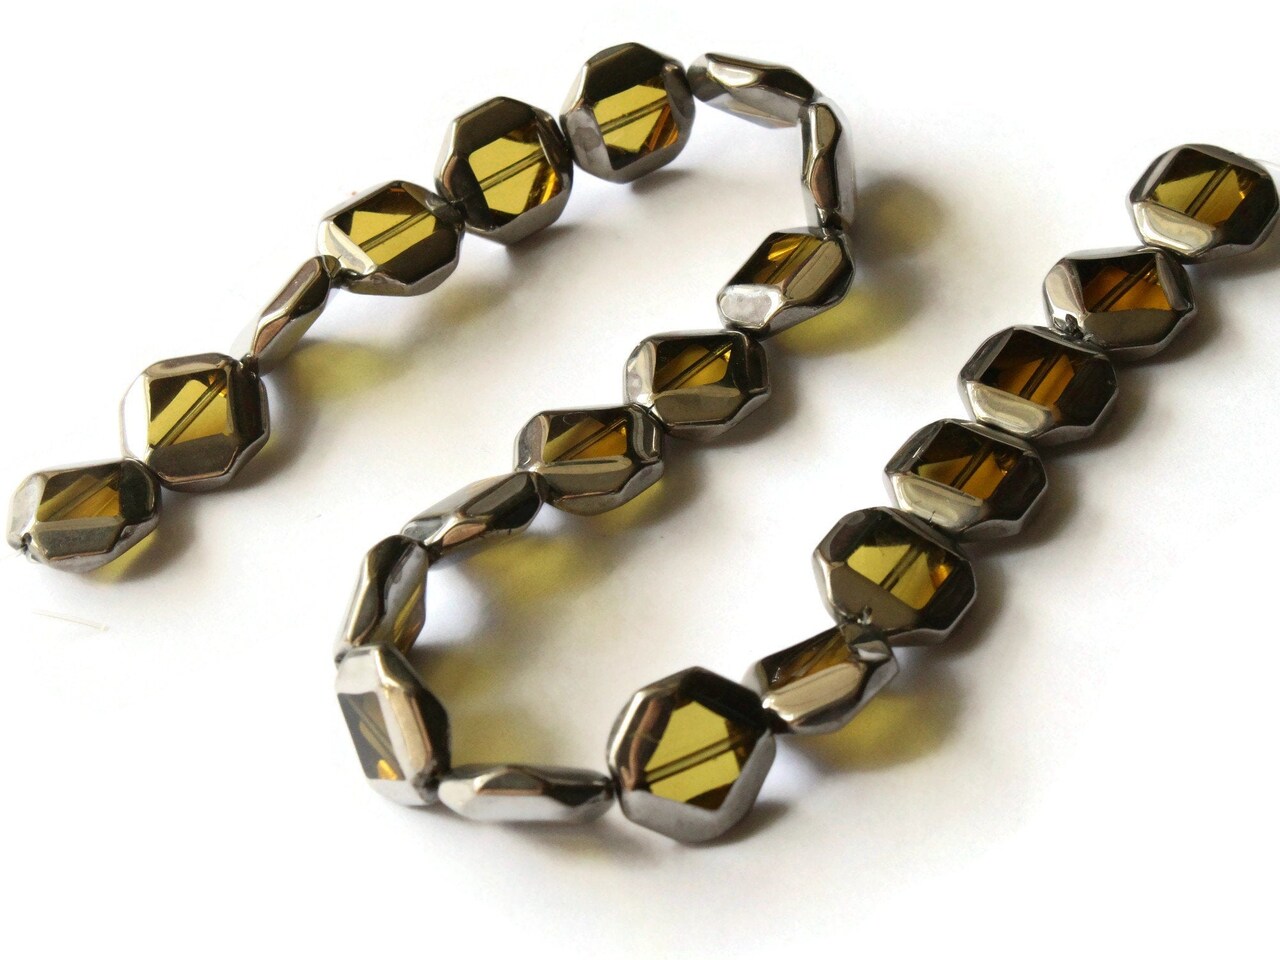 22 14mm Silver Rimmed Glass Beads Yellow Octagon Window Beads